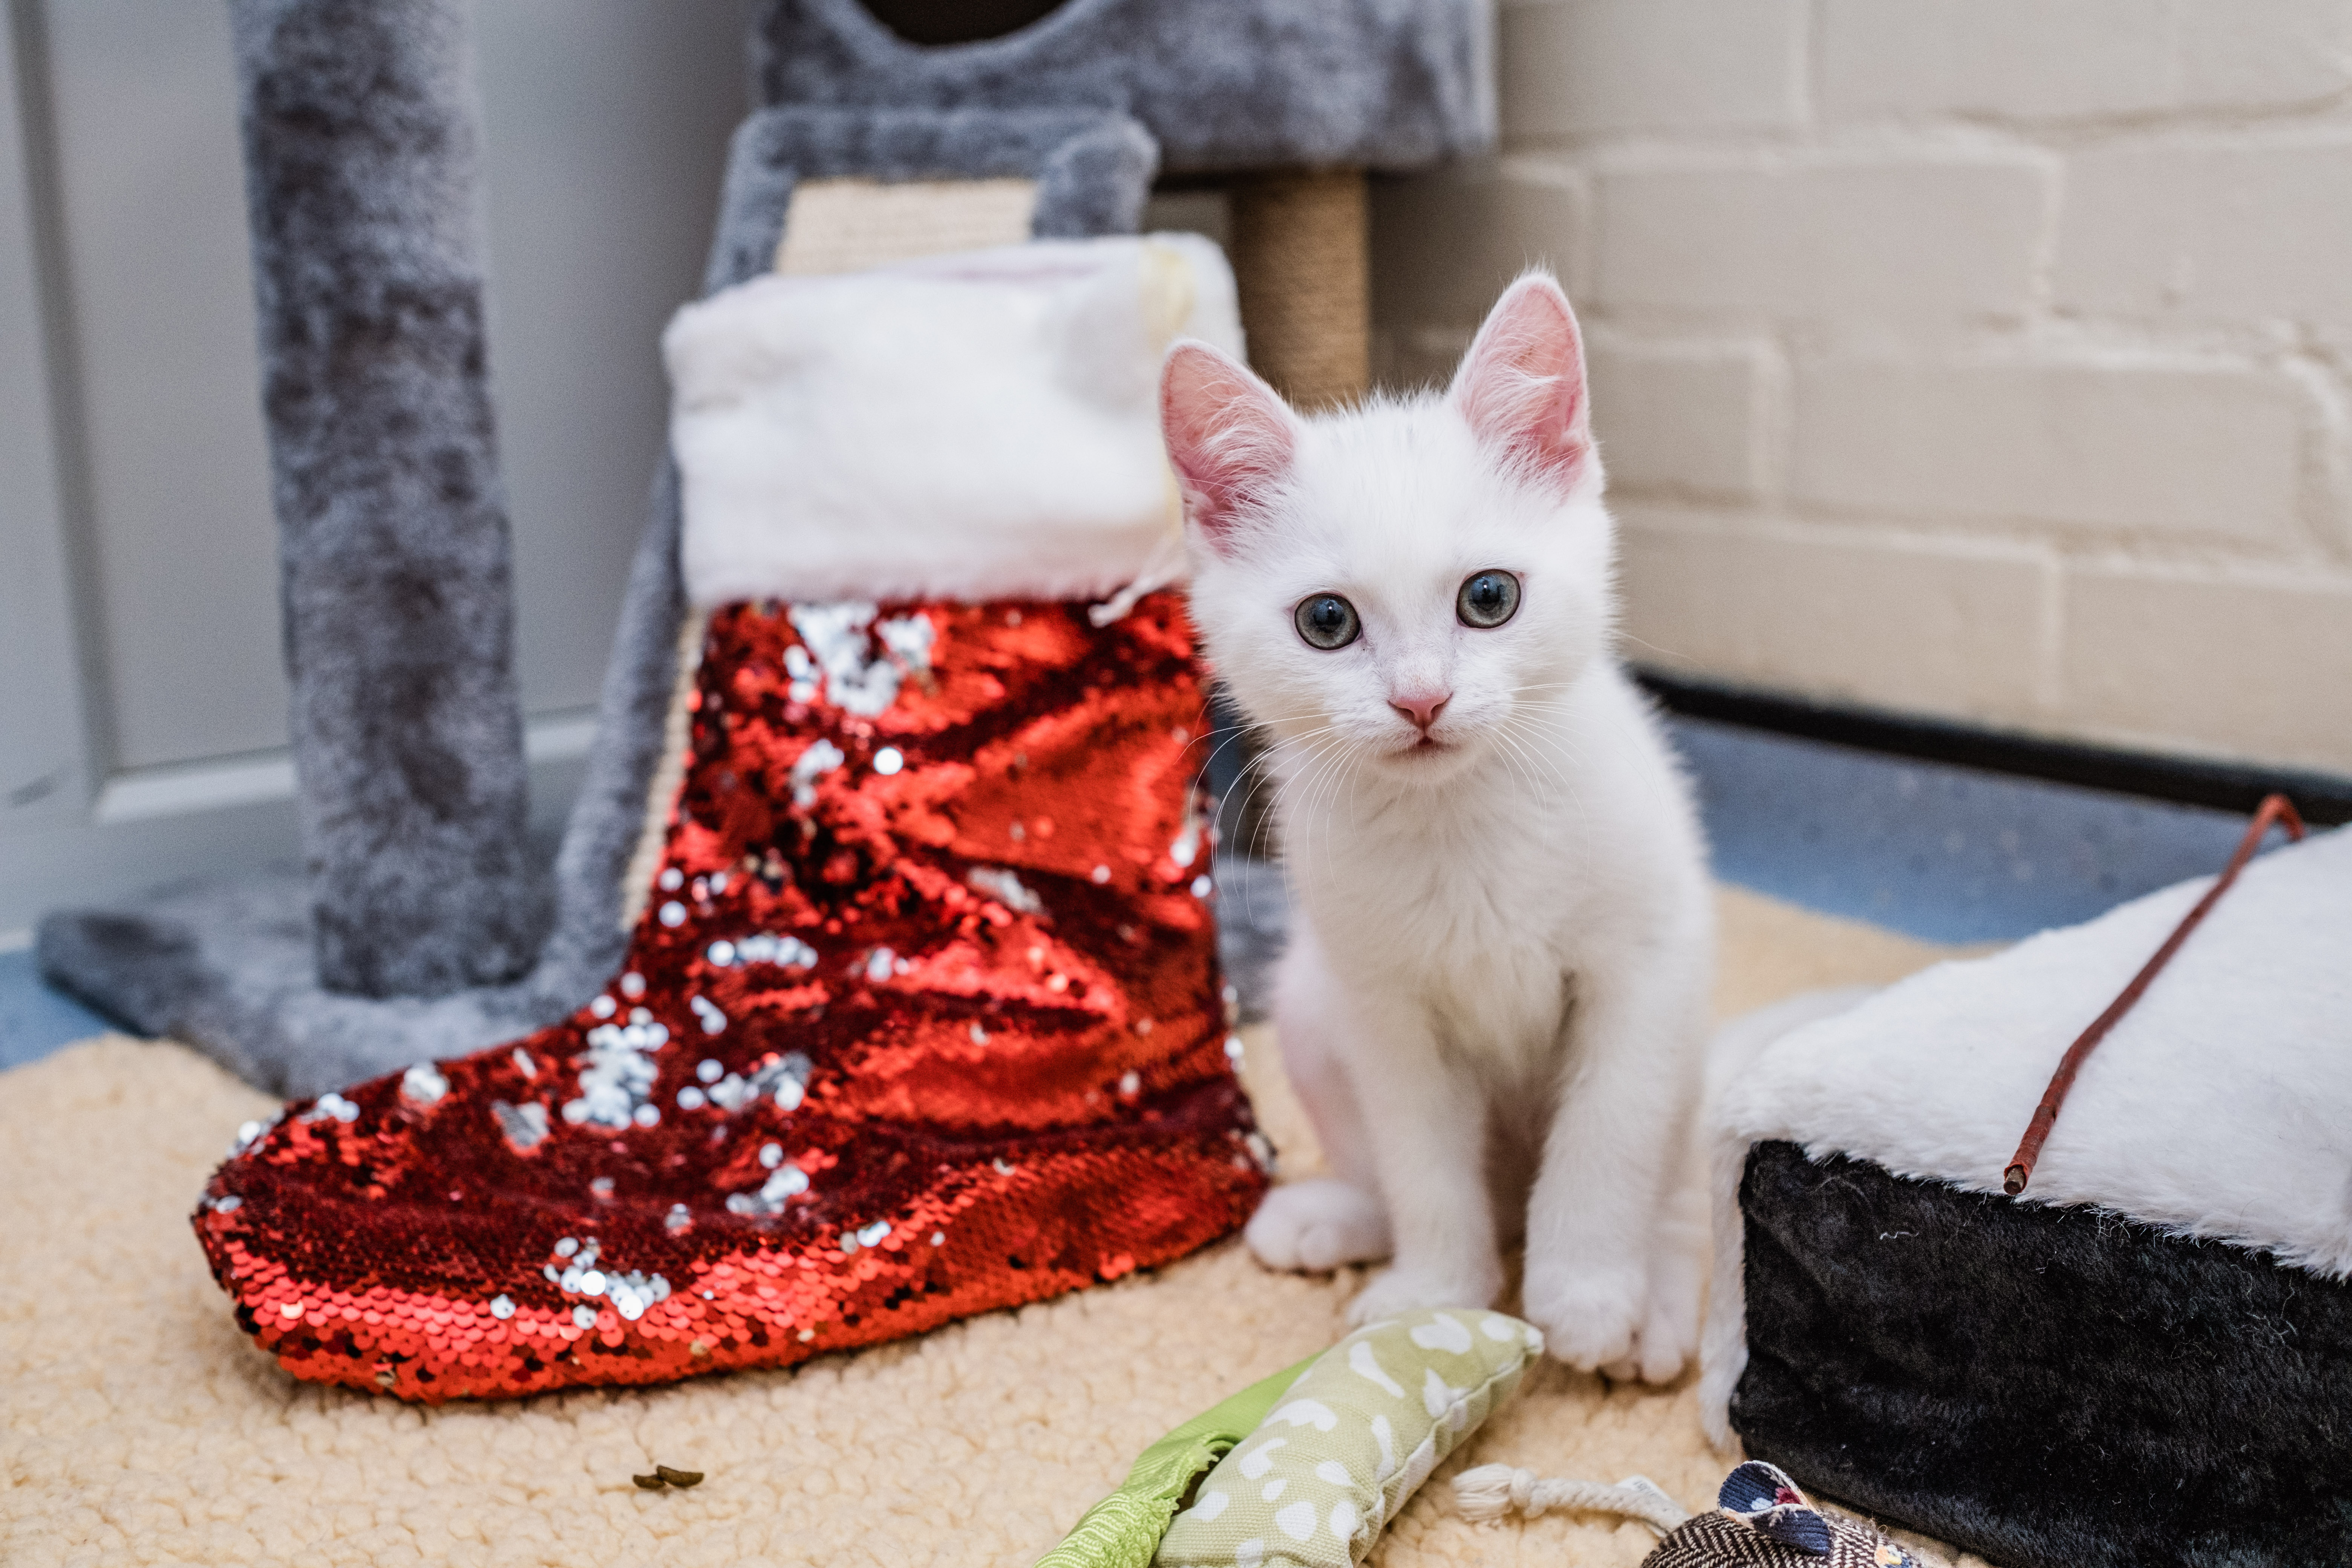 A white kitten stares into the camera as it sits upright next to a red, sequinned Christmas stocking